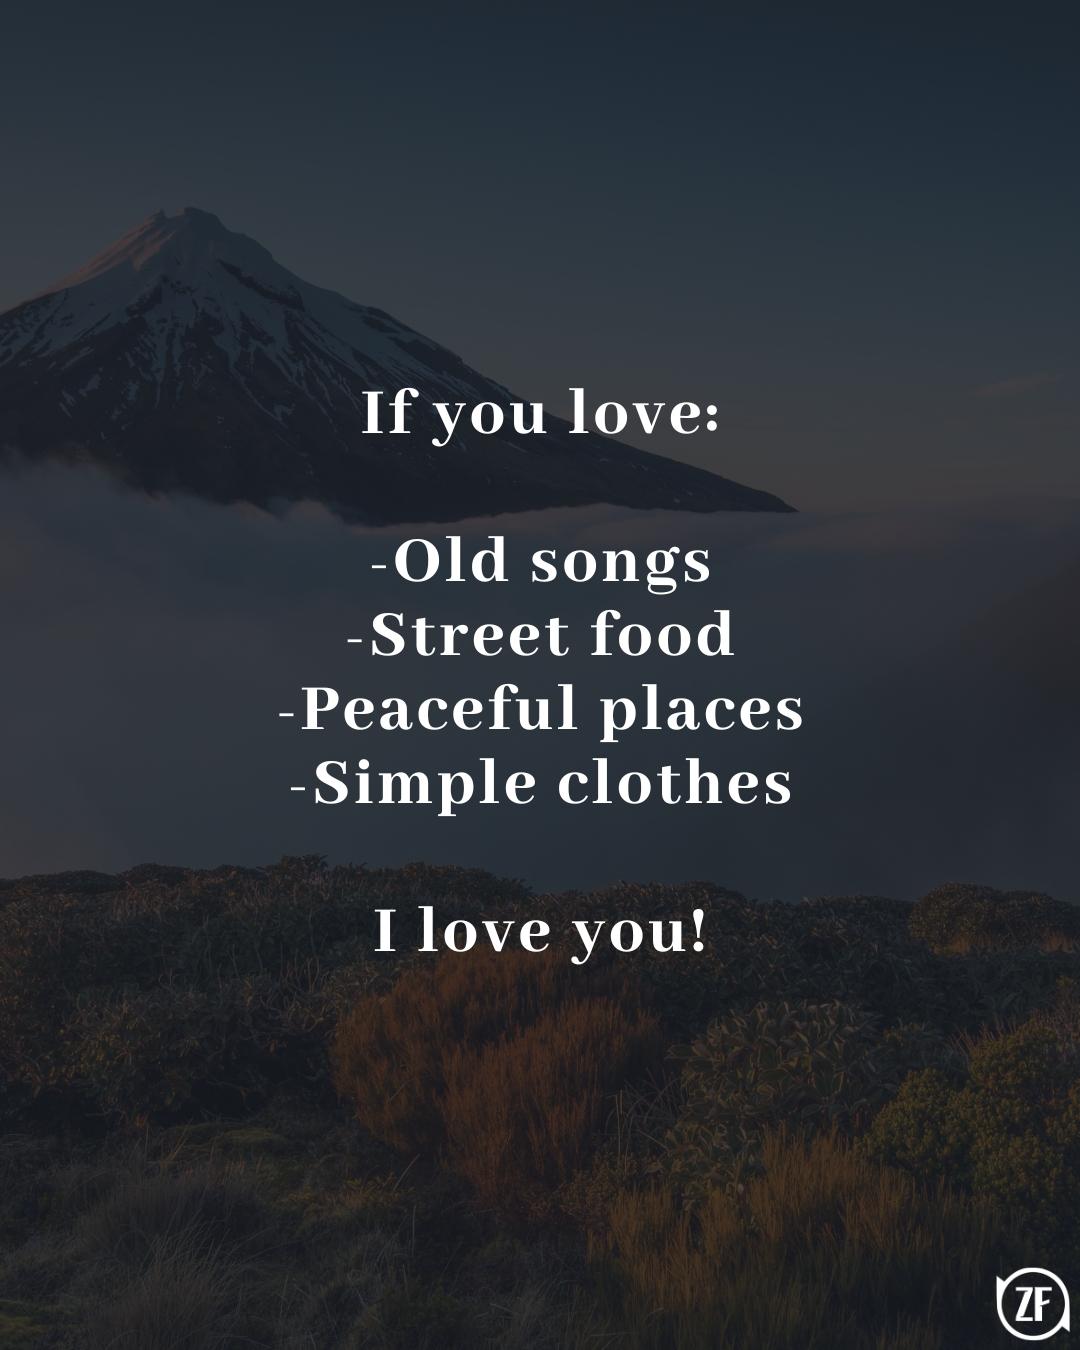 If you love: -Old songs -Street food -Peaceful places -Simple clothes I love you!